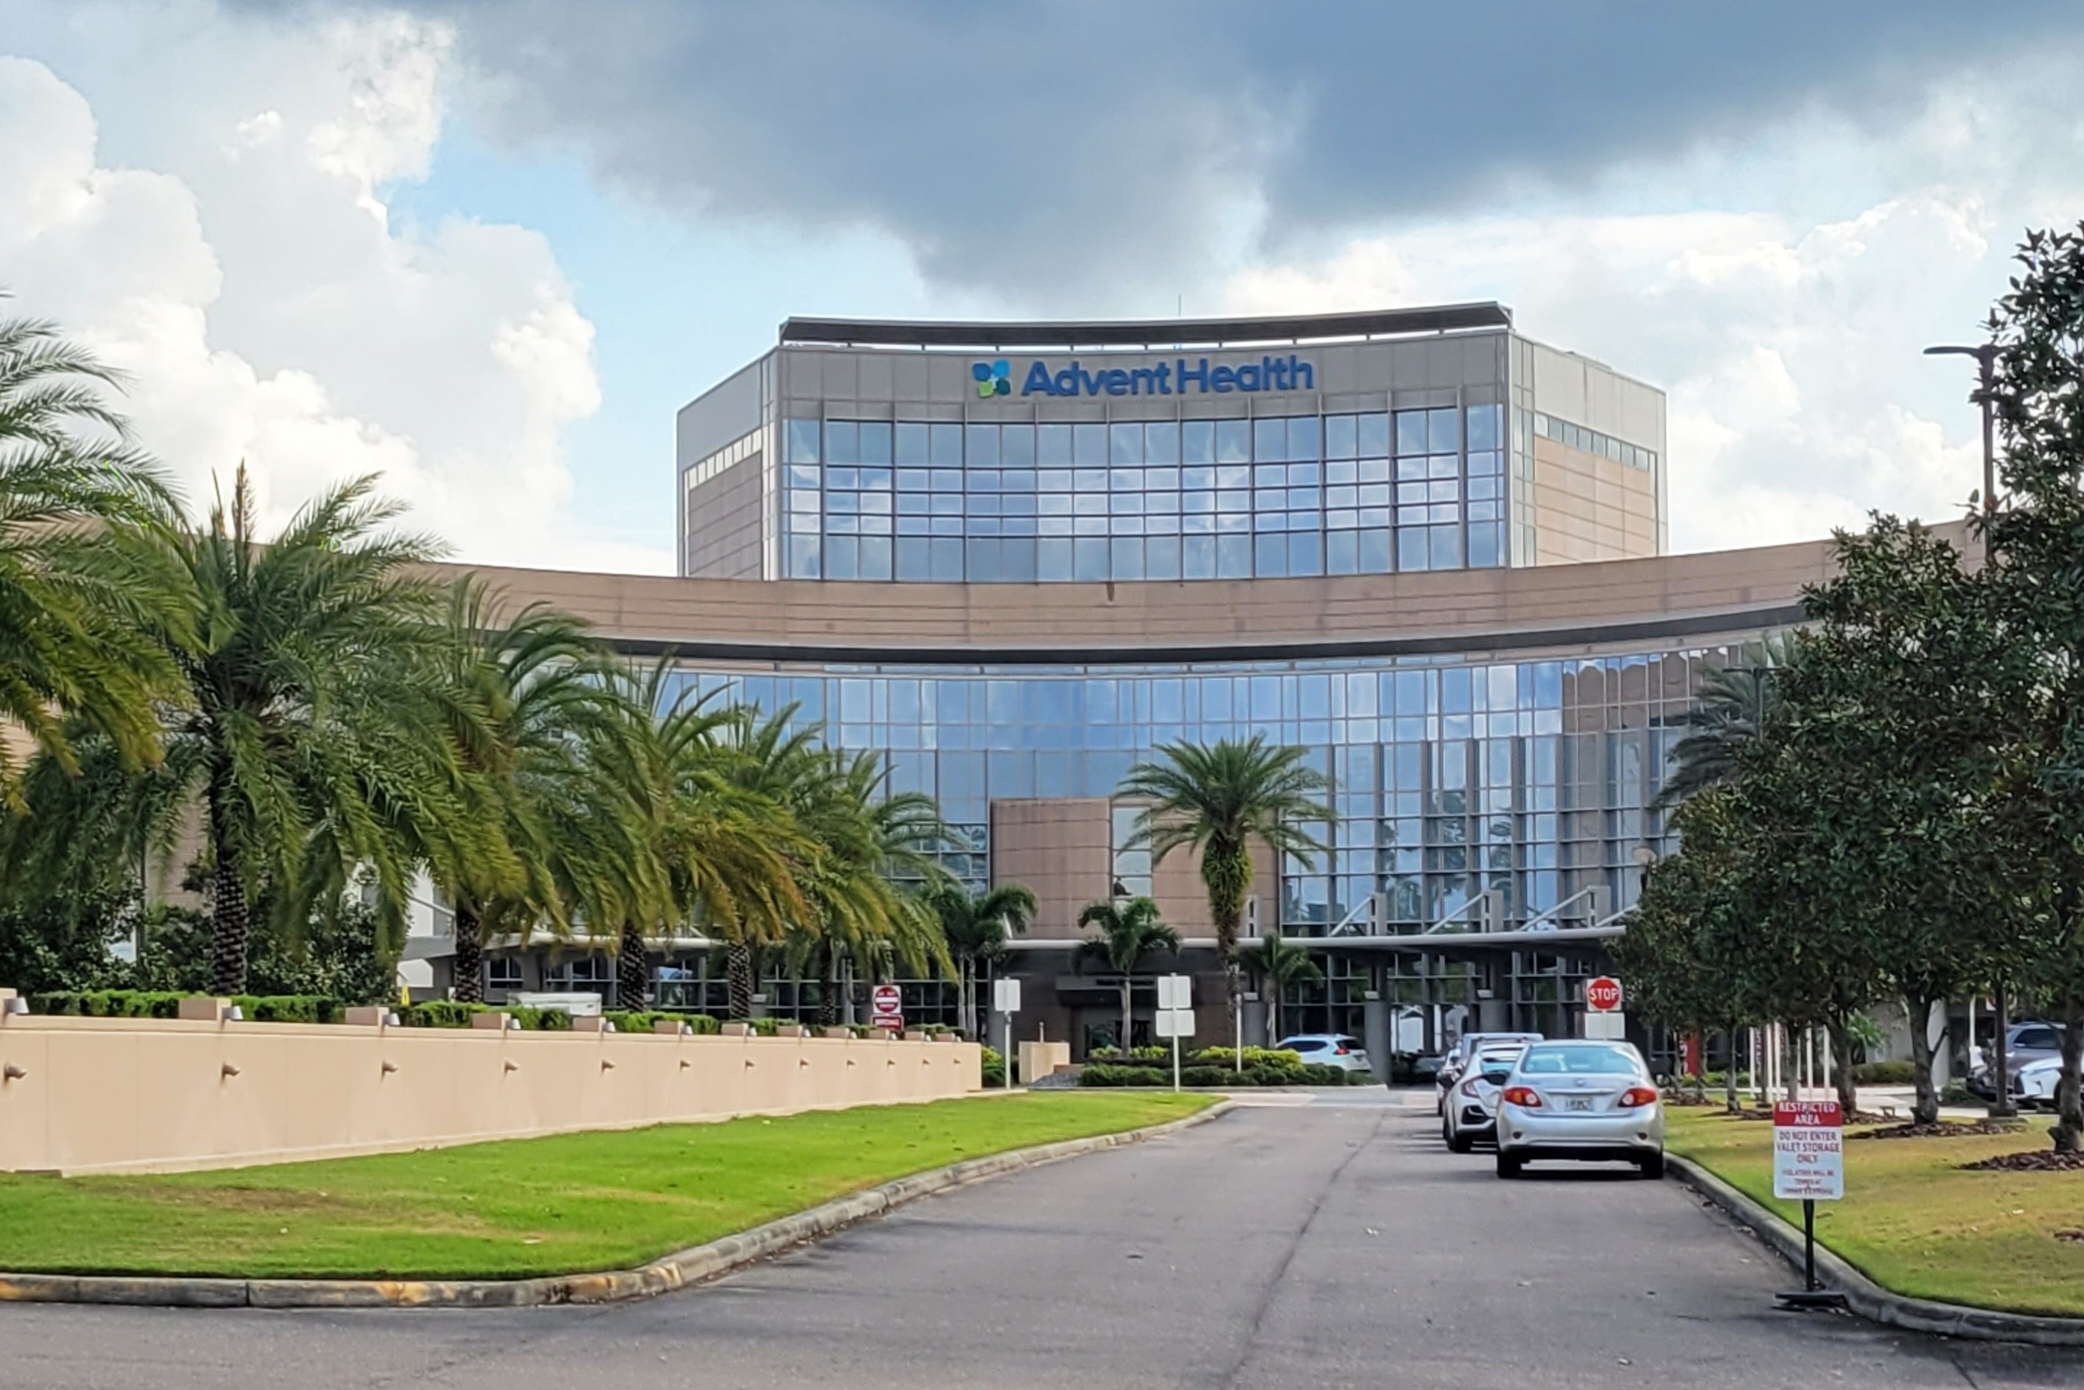 A photo of hospital with an AdventHealth logo on it.